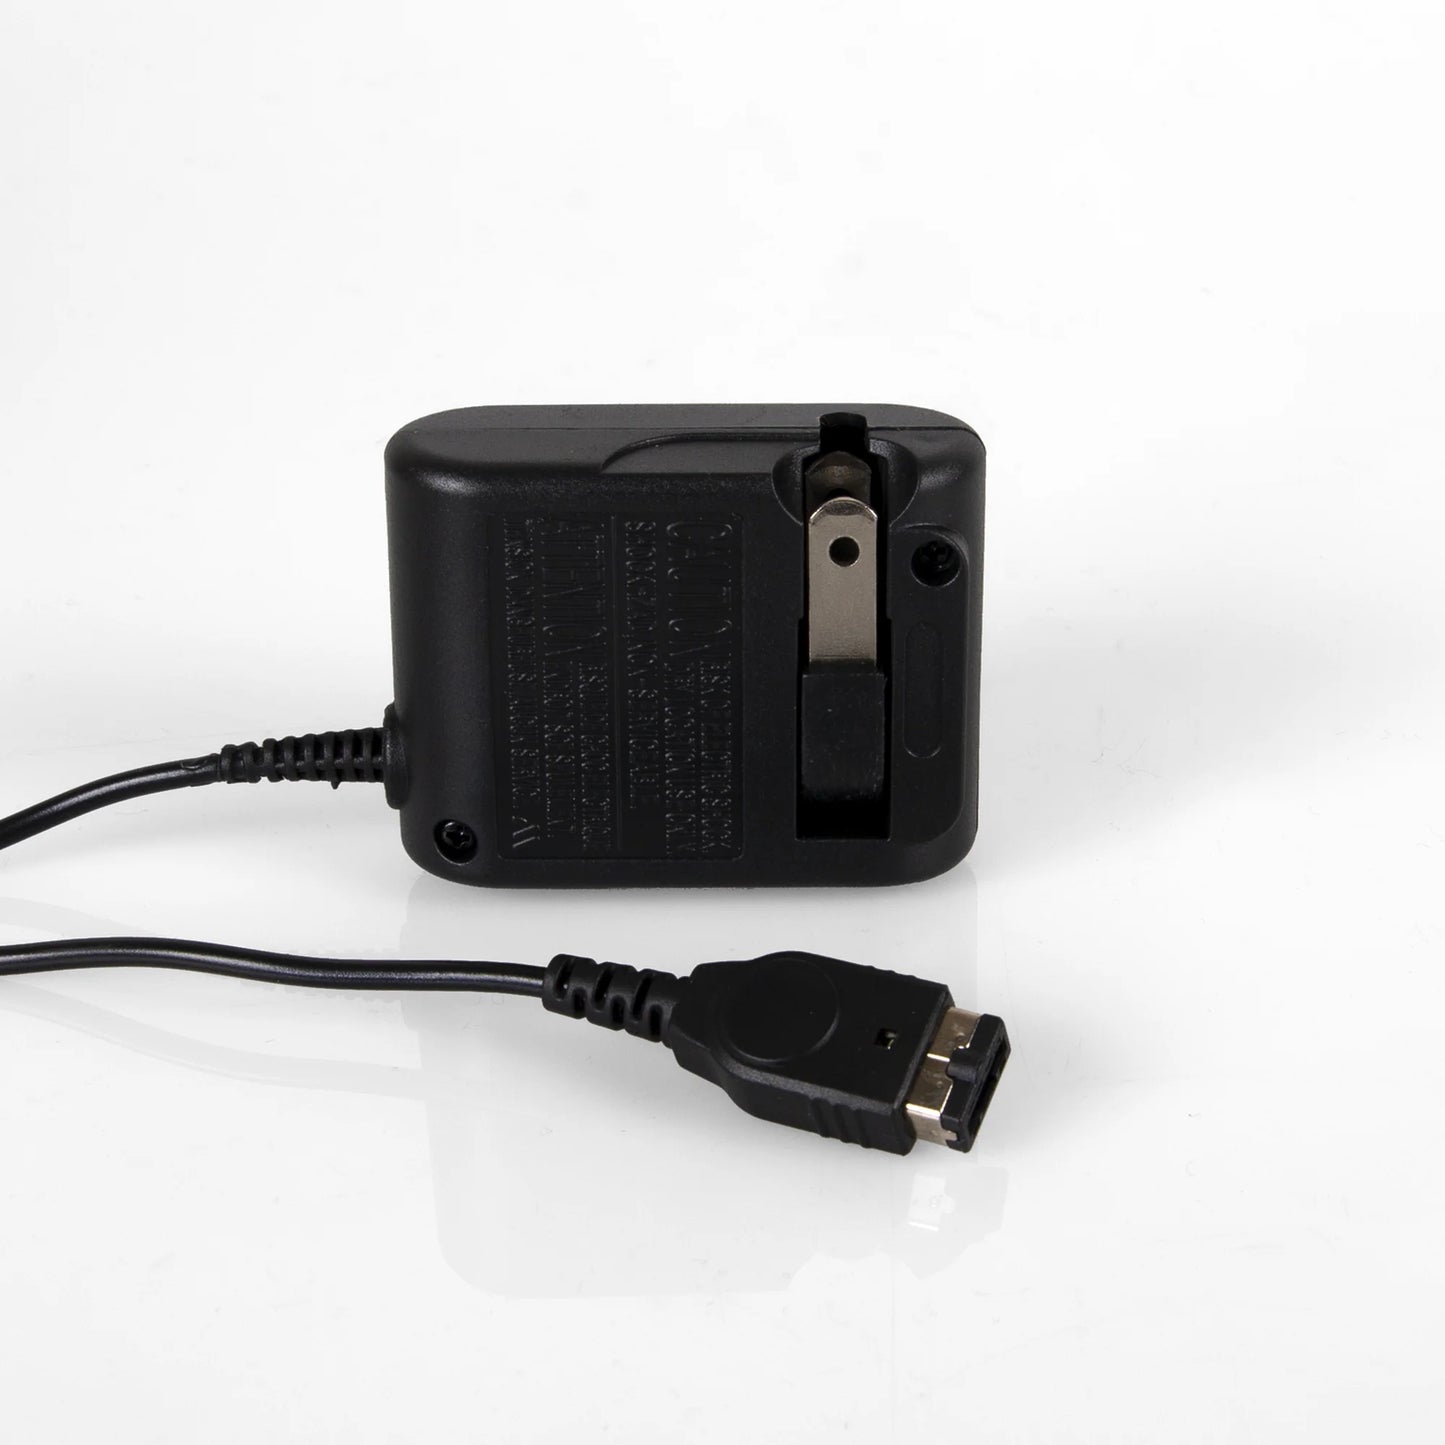 XYAB AC Adapter for Nintendo GBA SP/DS